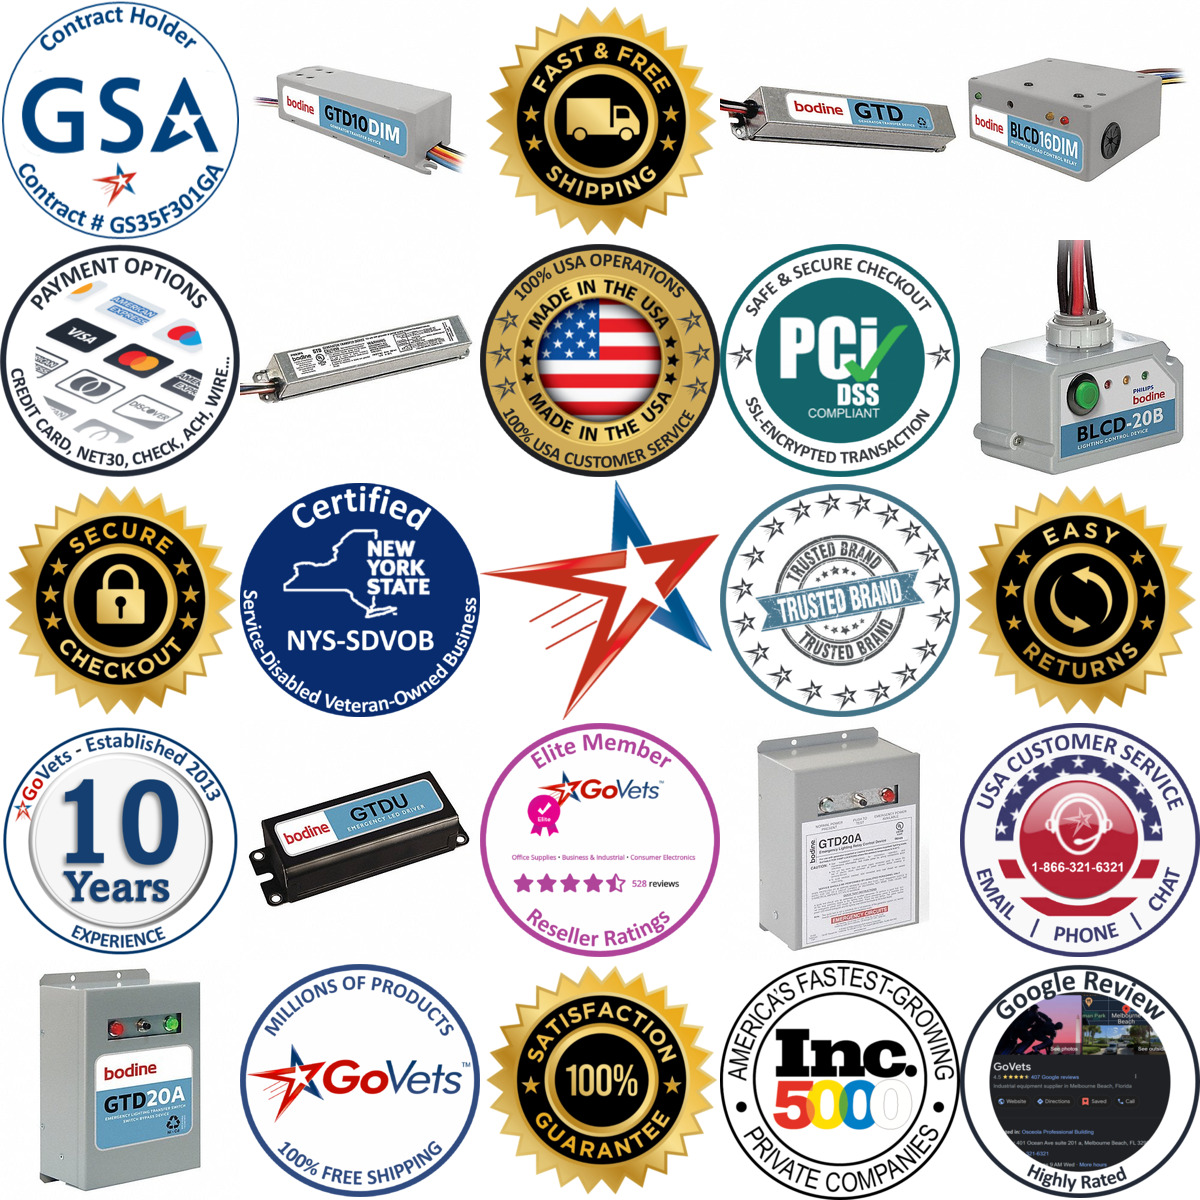 A selection of Generator Transfer Devices products on GoVets